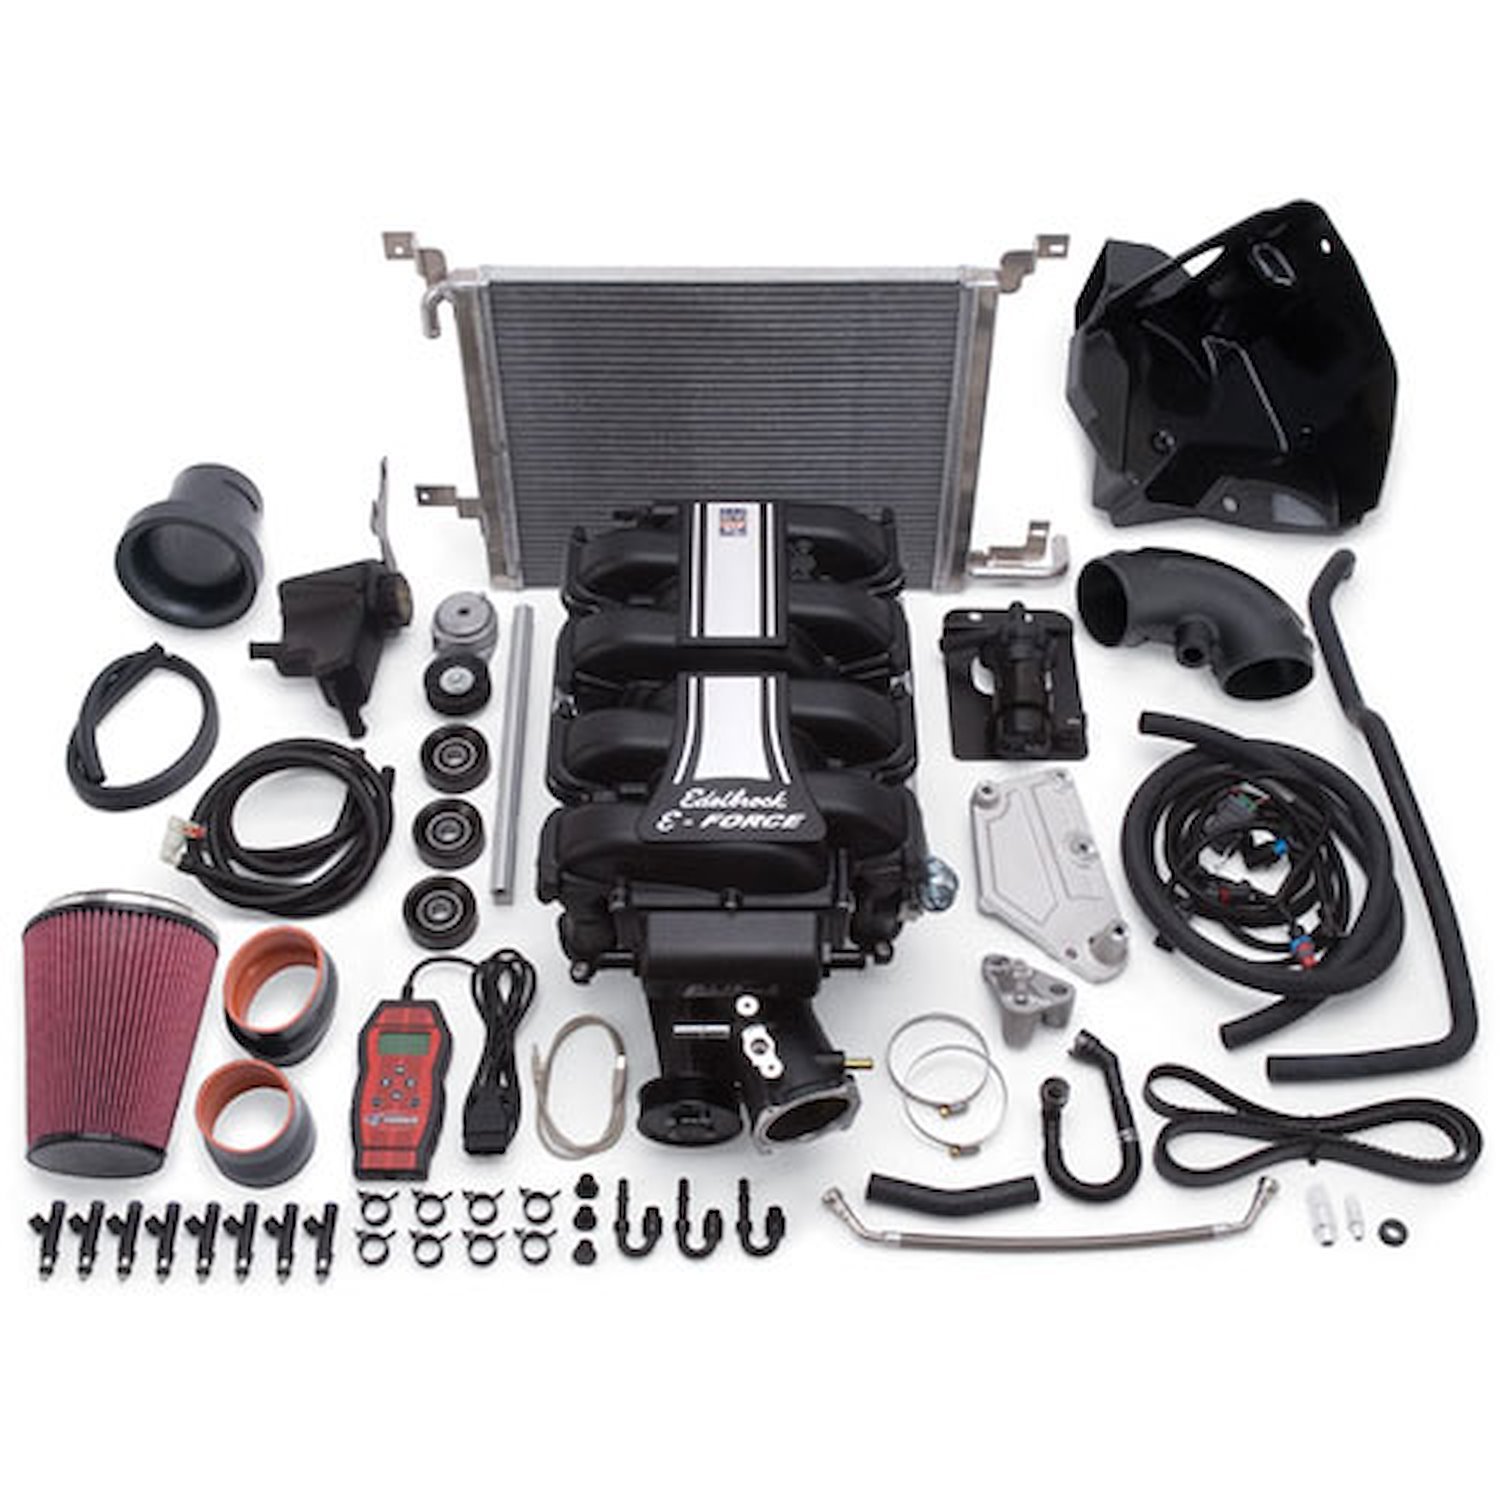 E-Force Stage 2 Supercharger Kit for 2011-2014 Ford Mustang GT 5.0L